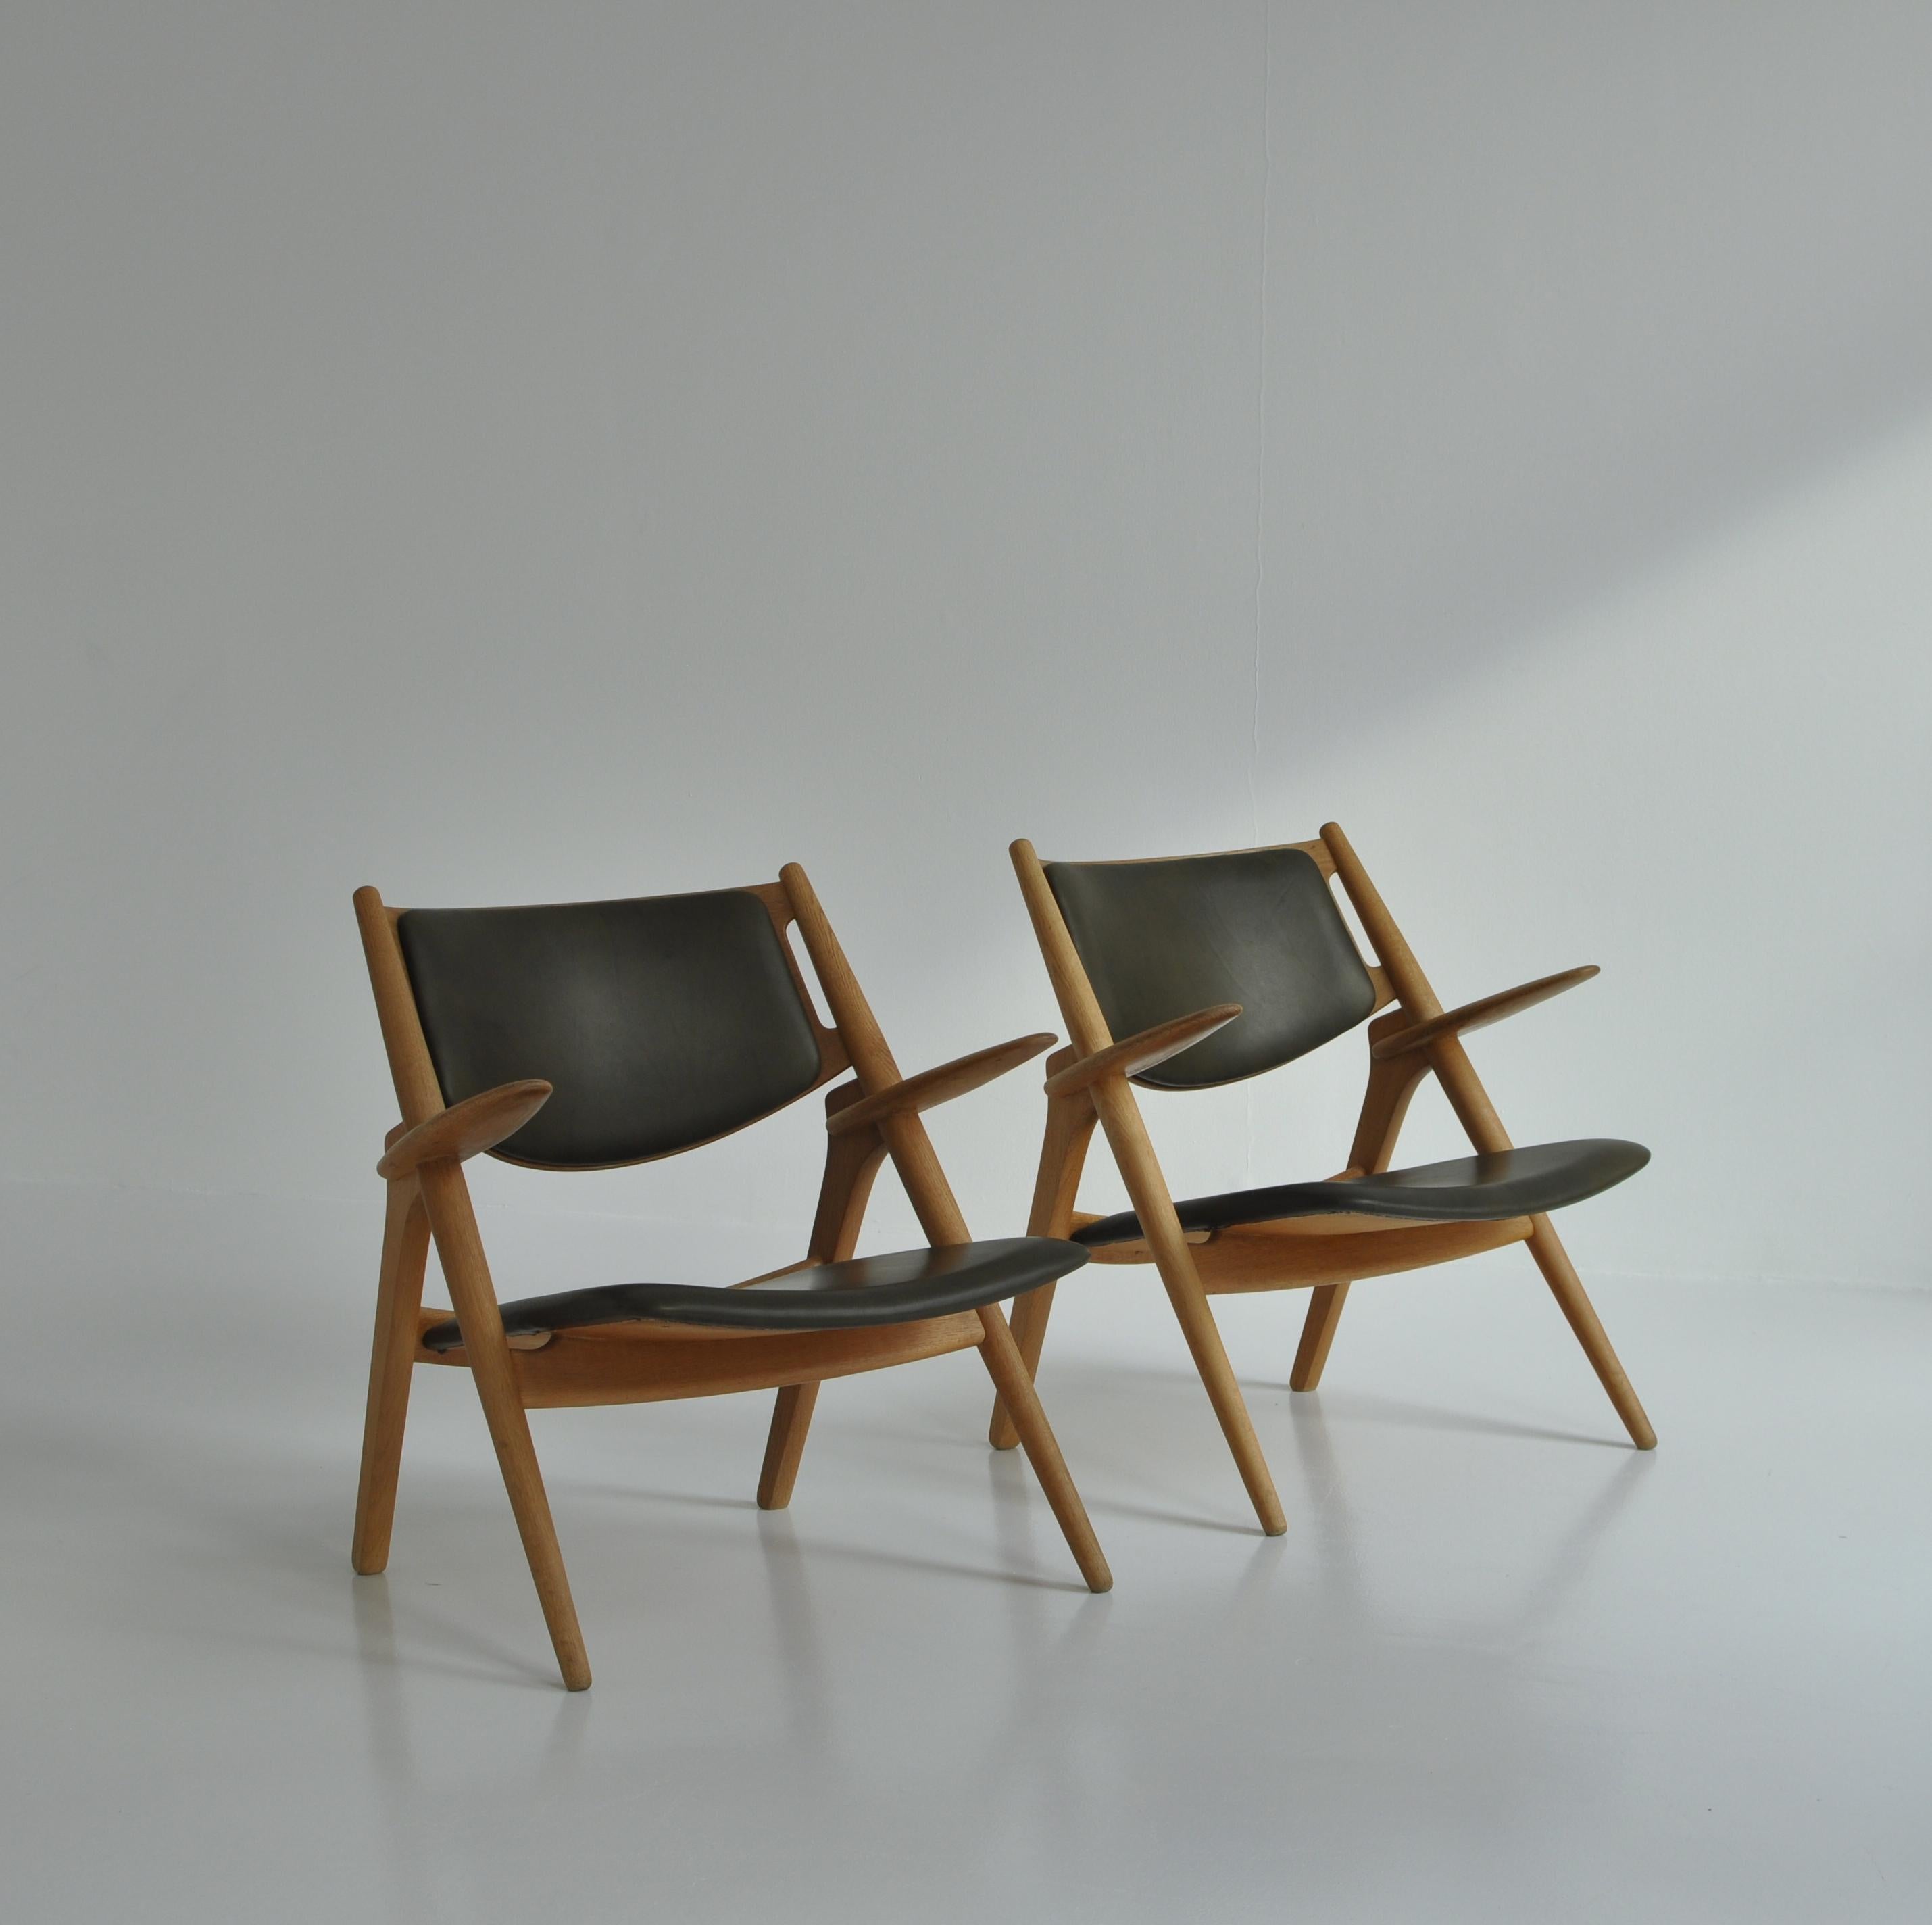 Danish Hans J. Wegner Lounge Chairs from the 1960s in Oak and Dark Green Leather